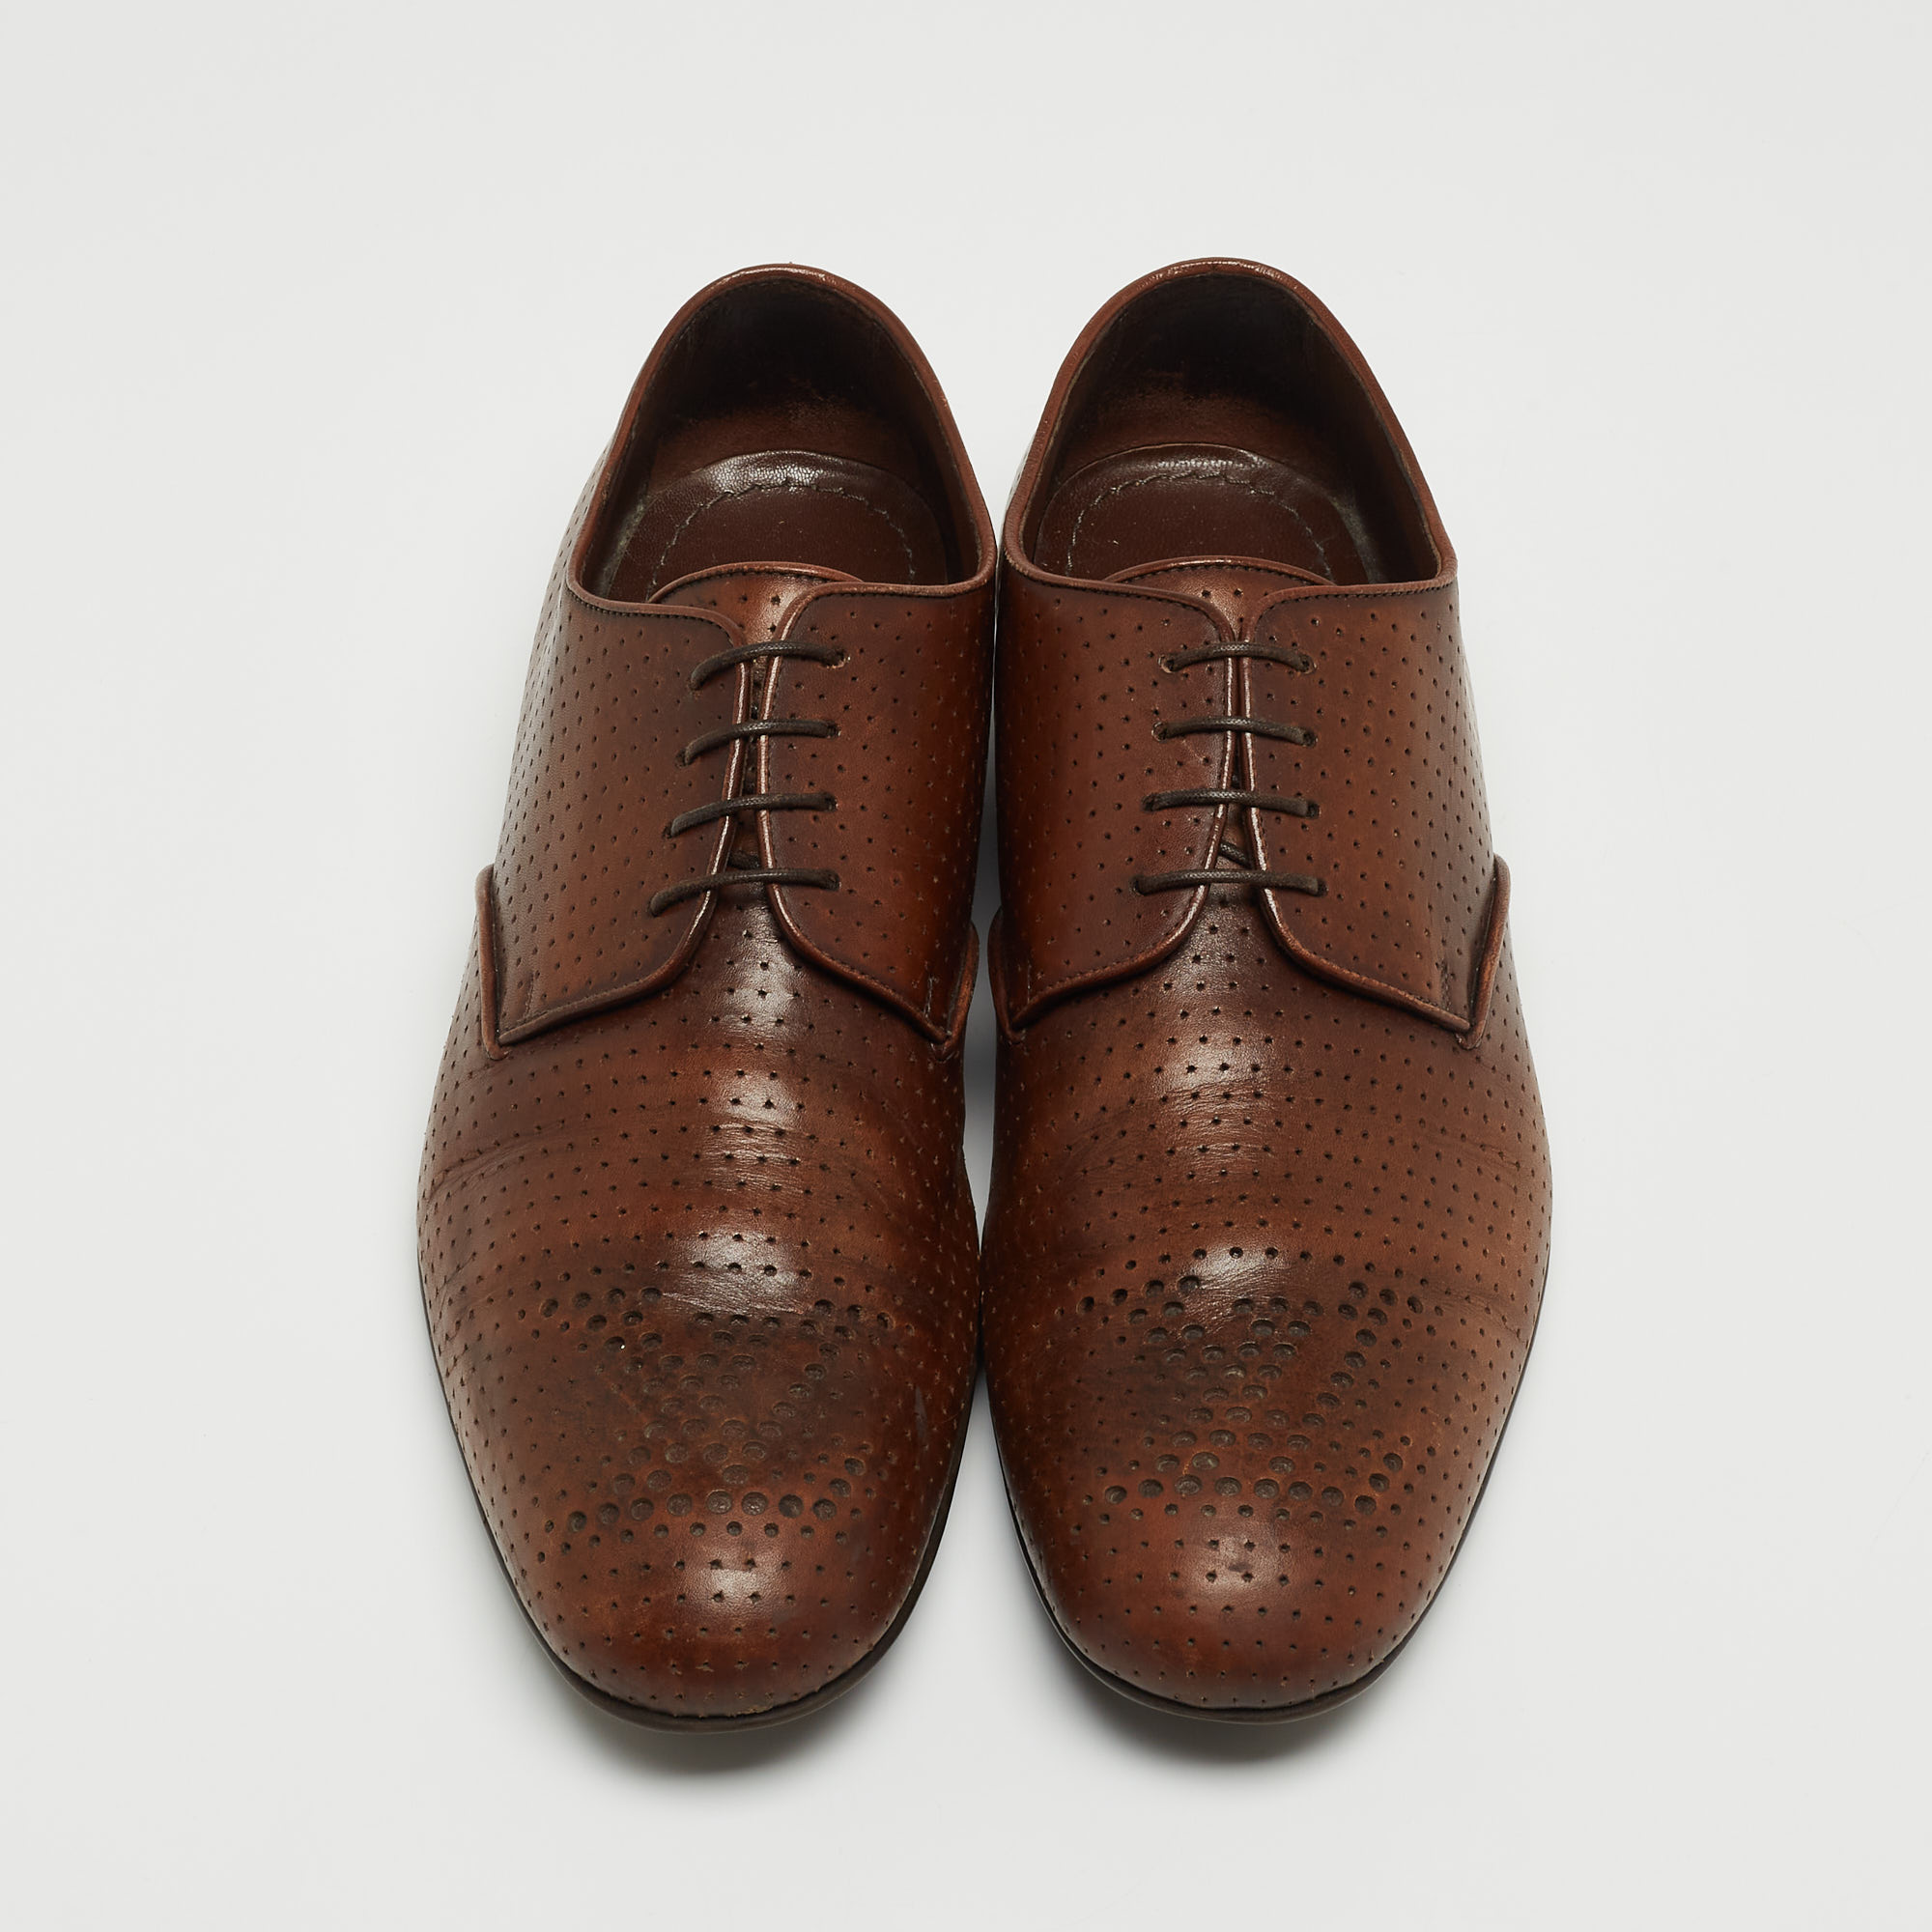 Louis Vuitton Brown Perforated Leather Lace Up Derby Size 40